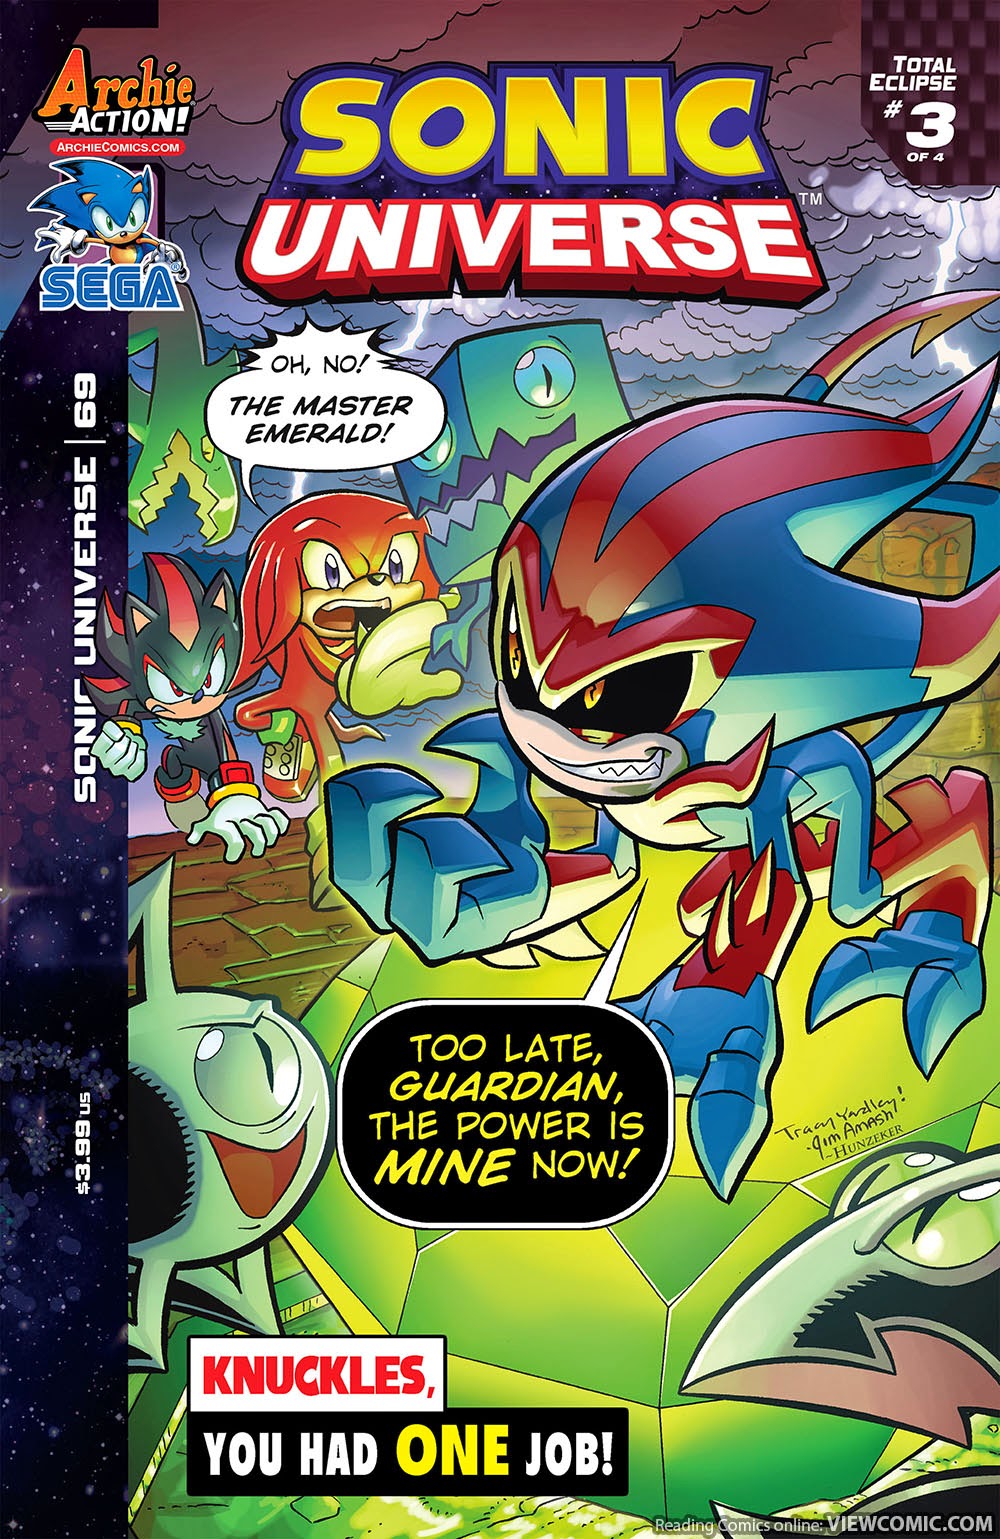 Sonic Universe 069 2014 | Read Sonic Universe 069 2014 comic online in high  quality. Read Full Comic online for free - Read comics online in high  quality .|viewcomiconline.com